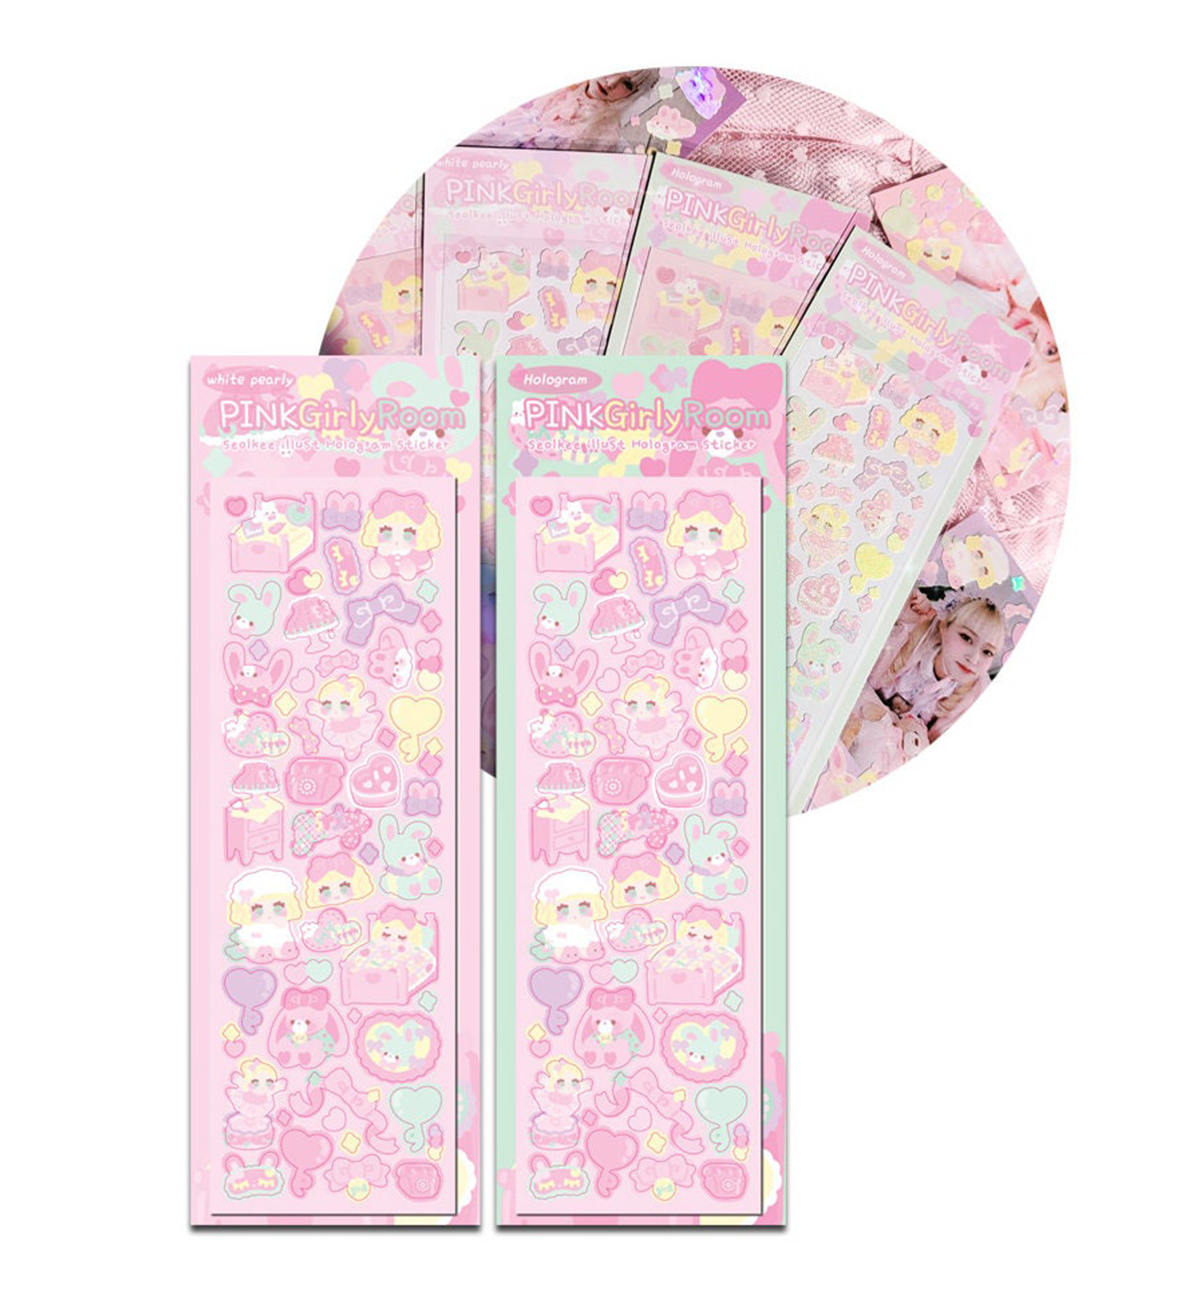 Pink Girly Room Seal Sticker